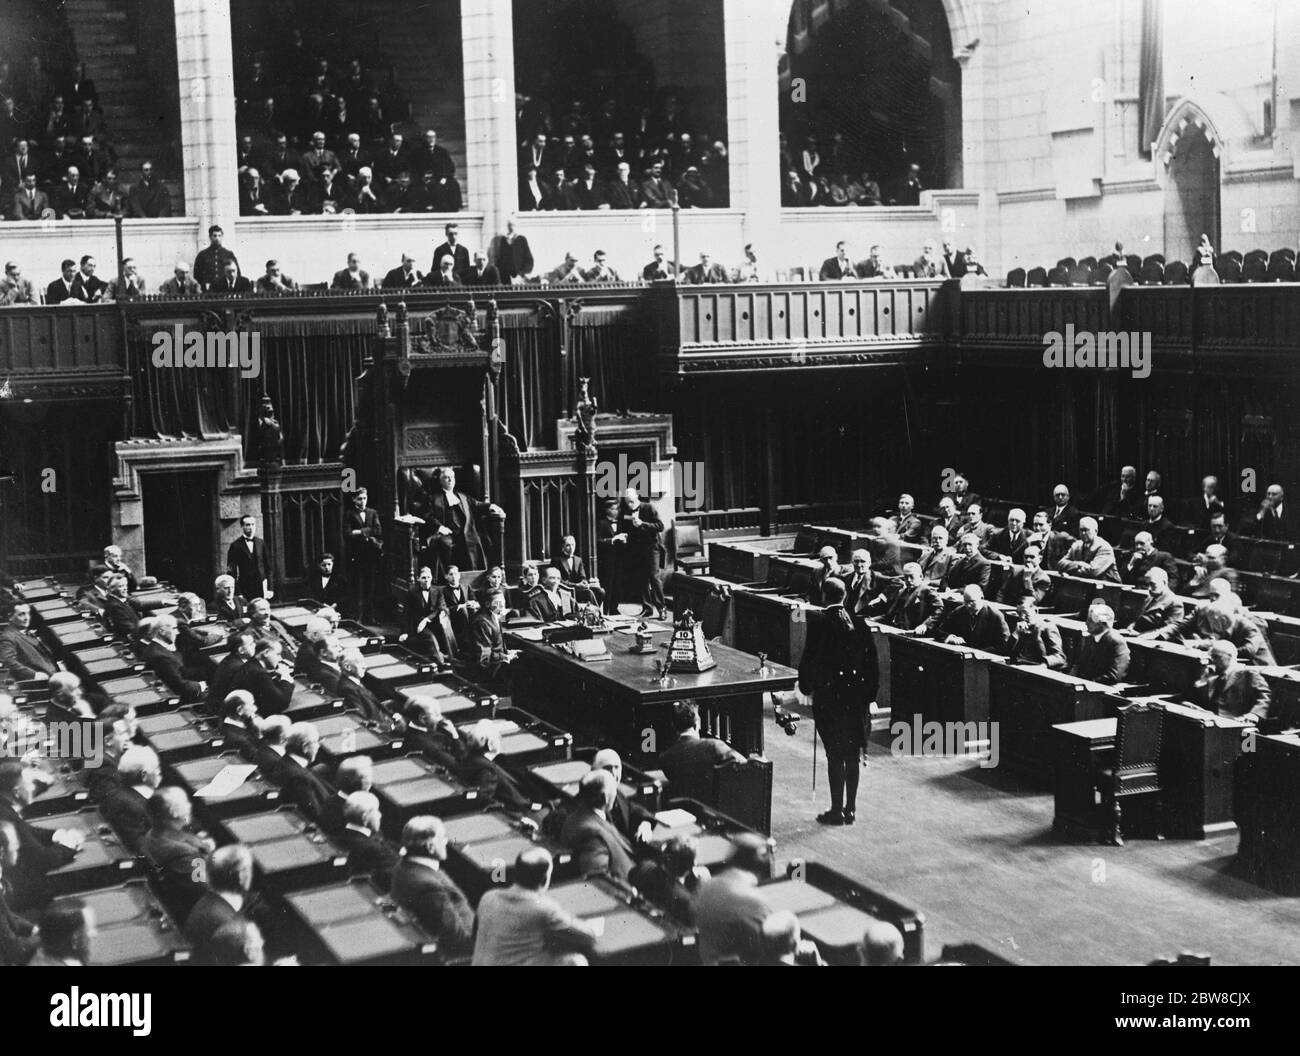 Canada 's 16th Parliament formally opened . An interior view showing the newly assembled House of Commons . 24 December 1926 Stock Photo